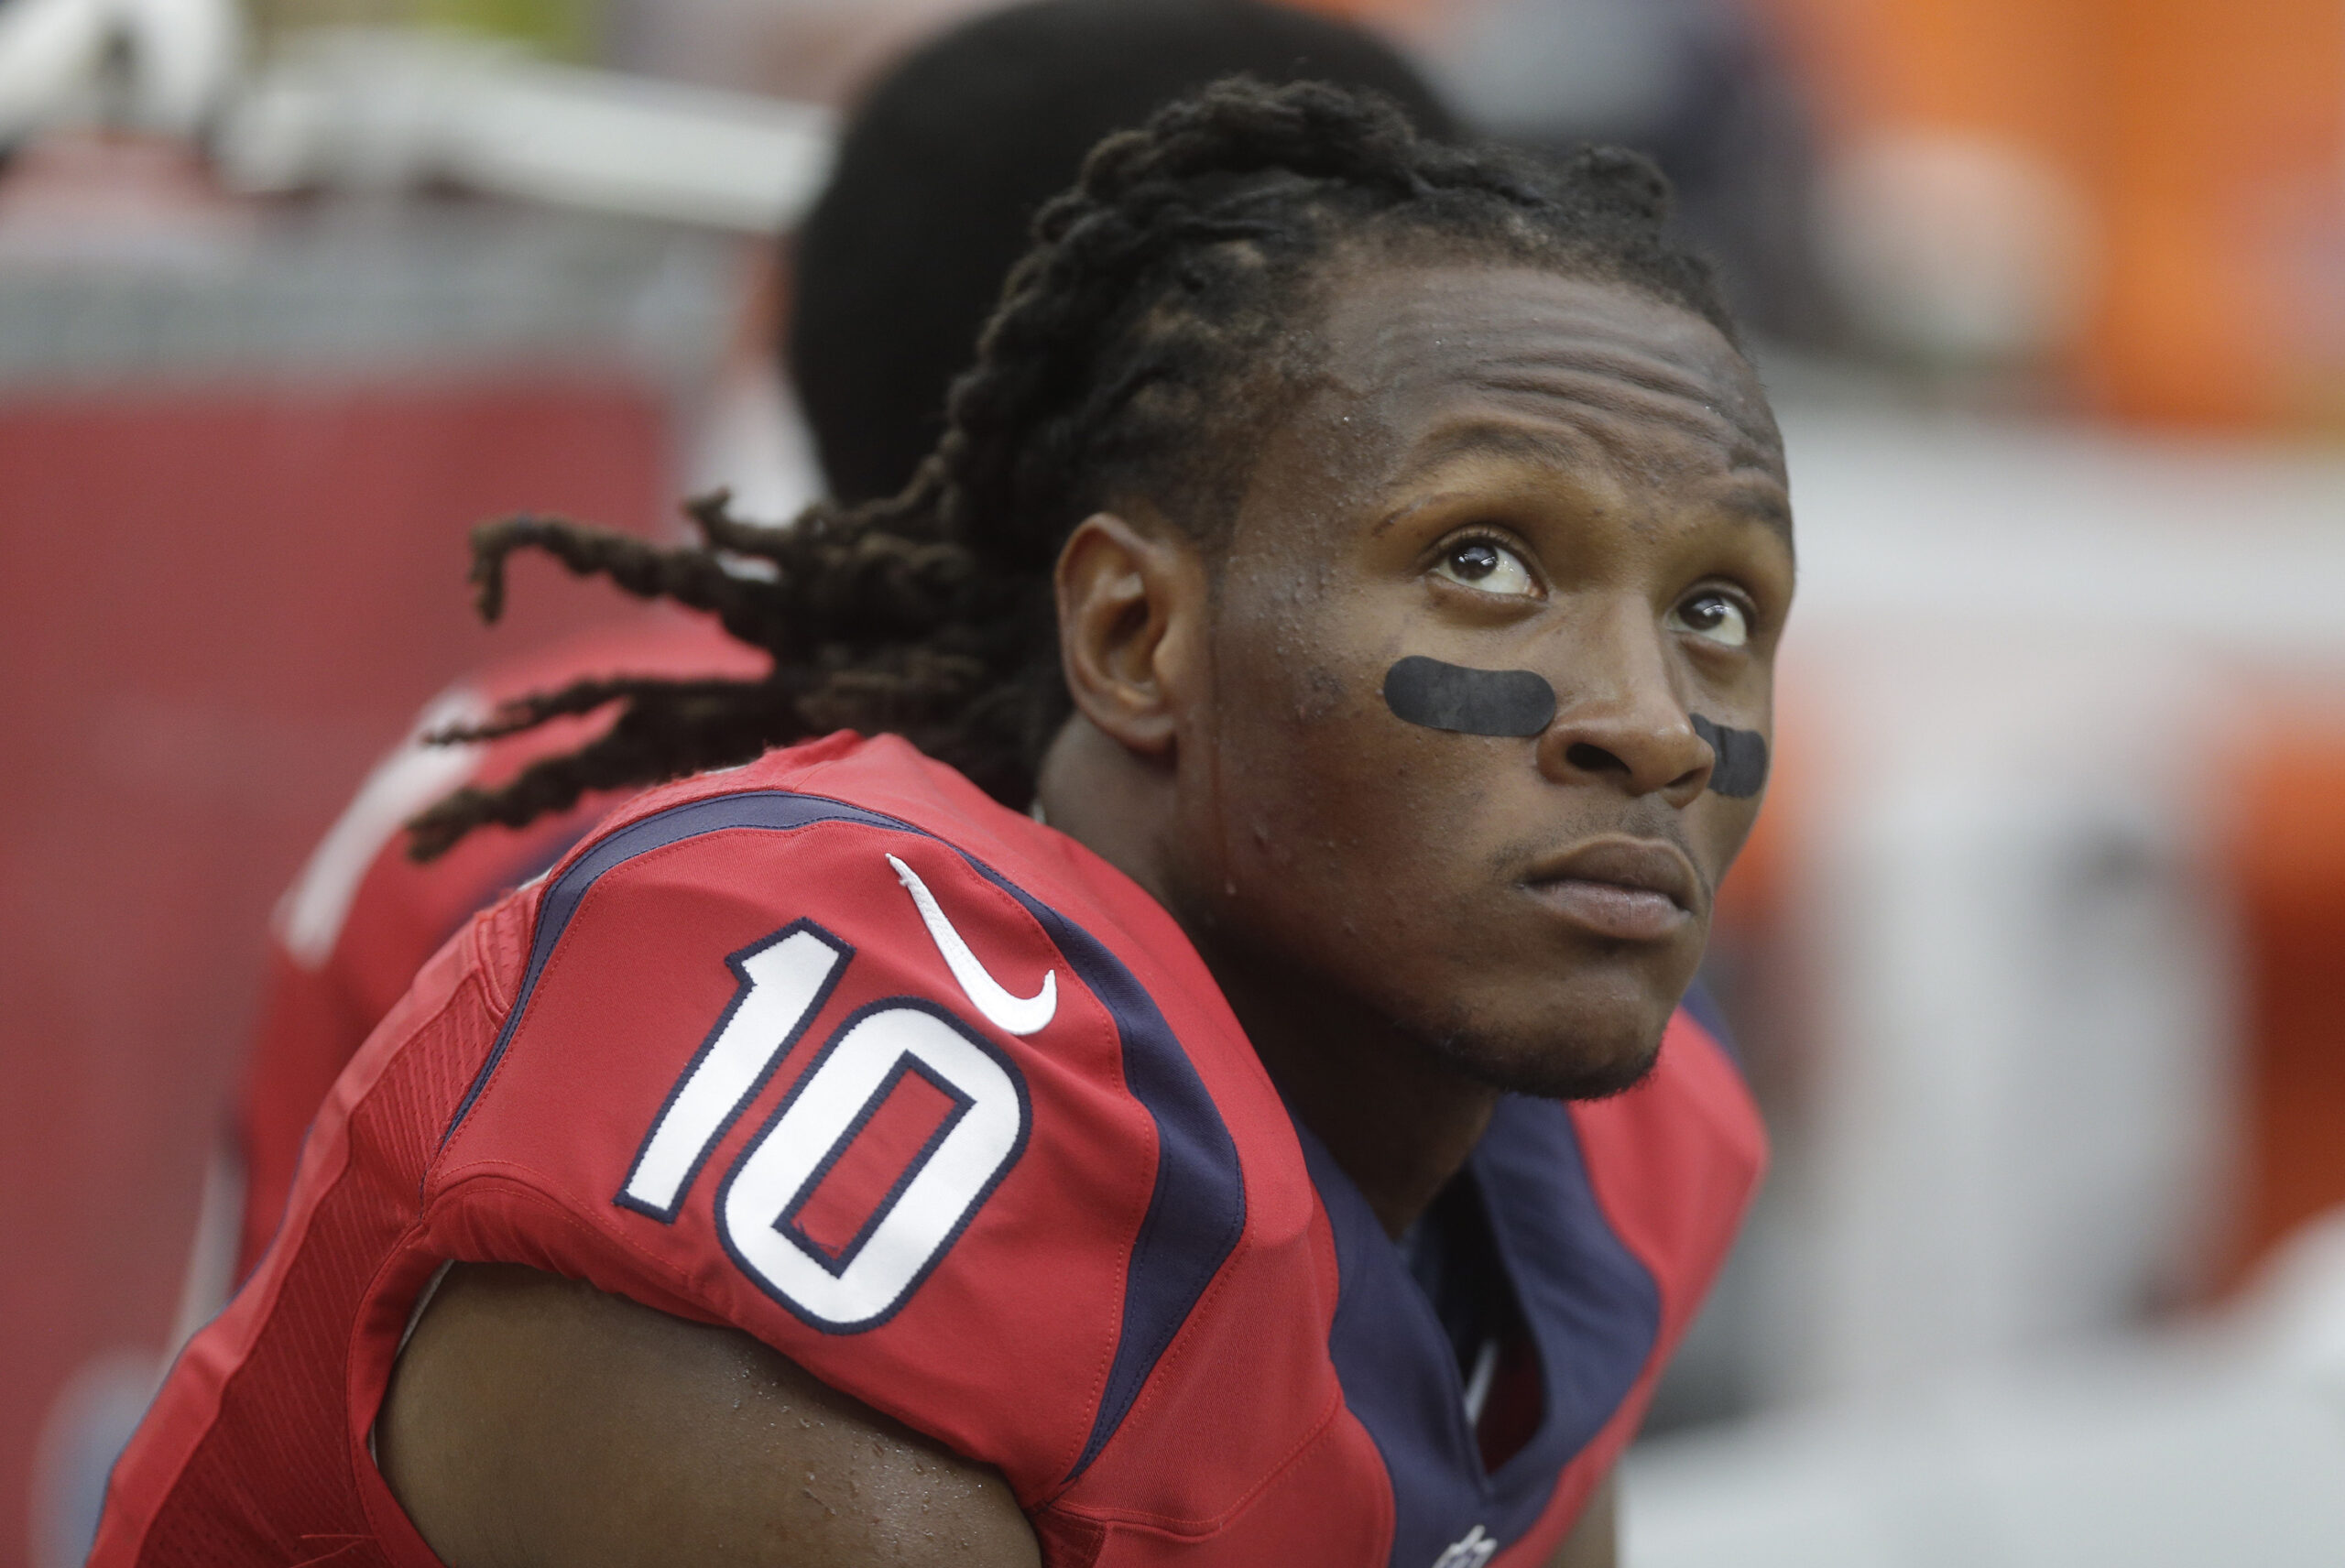 Who Is Footballer DeAndre Hopkins Girlfriend? All You Need To Know!